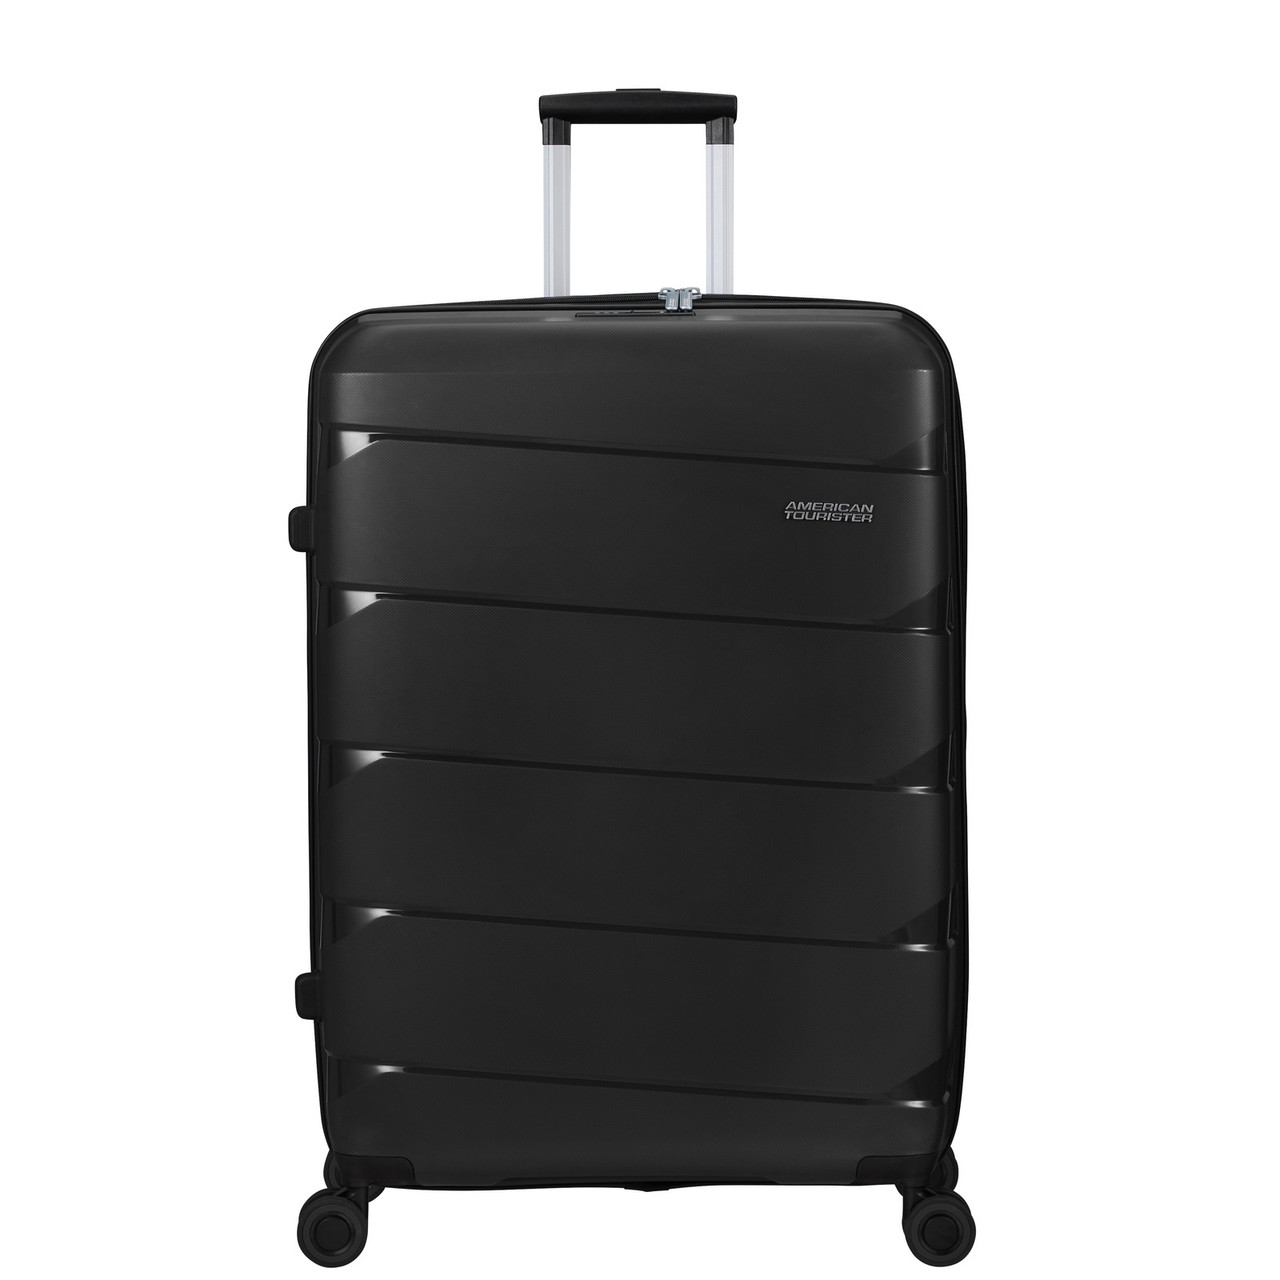 American Tourister Air Move 75cm Large Suitcase at Luggage Superstore